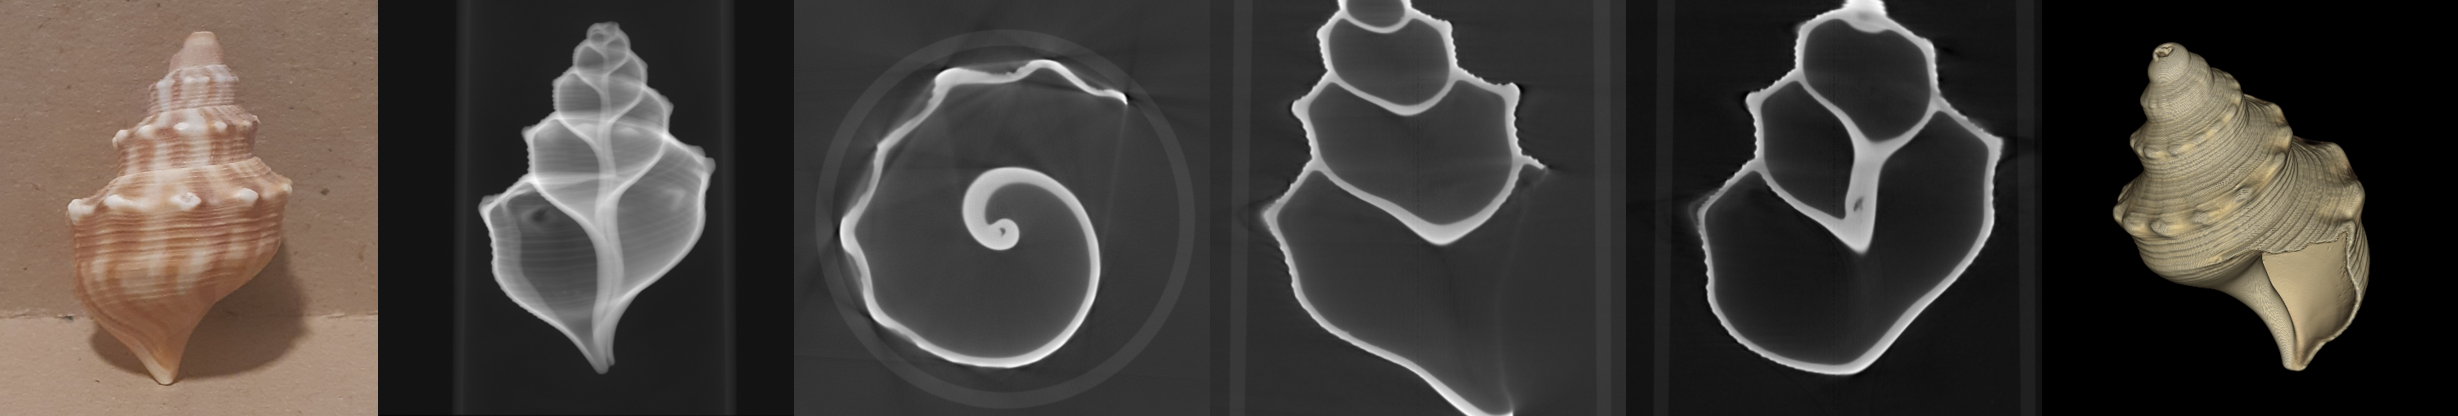 A collage of a photograph and CBCT images of the seashell